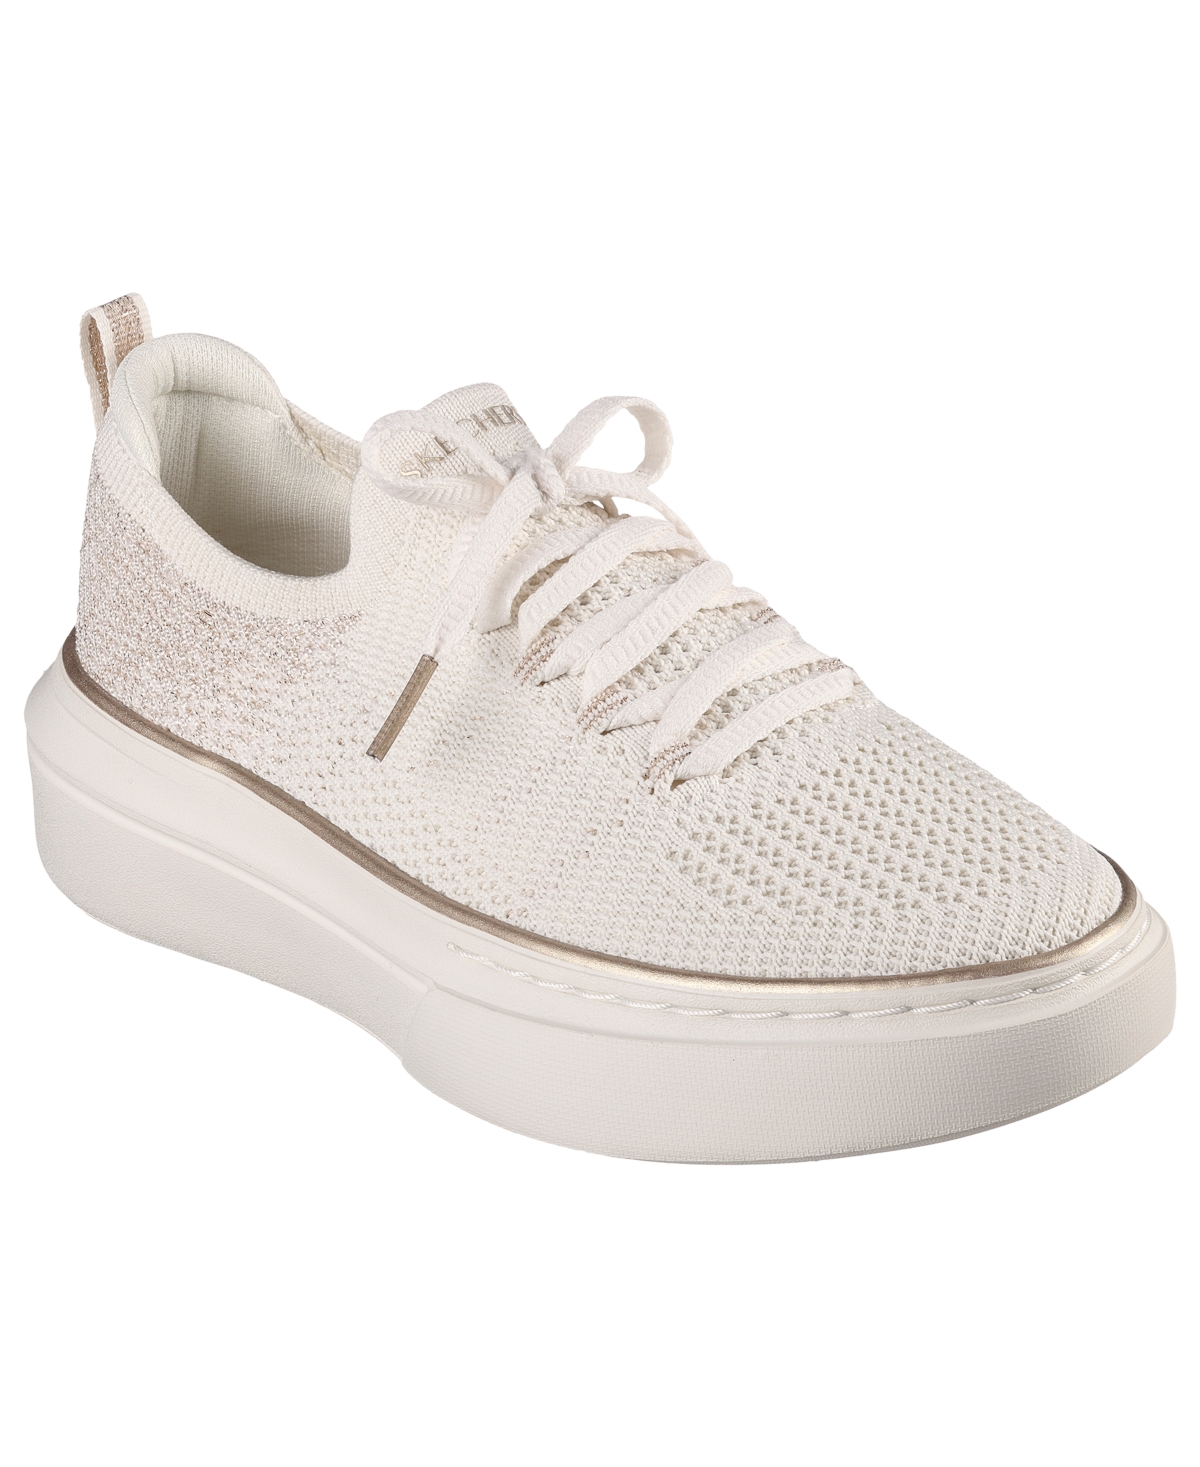 Women's Cordova Classic - Sparkling Dust Casual Sneakers from Finish Line - Off white/ off white